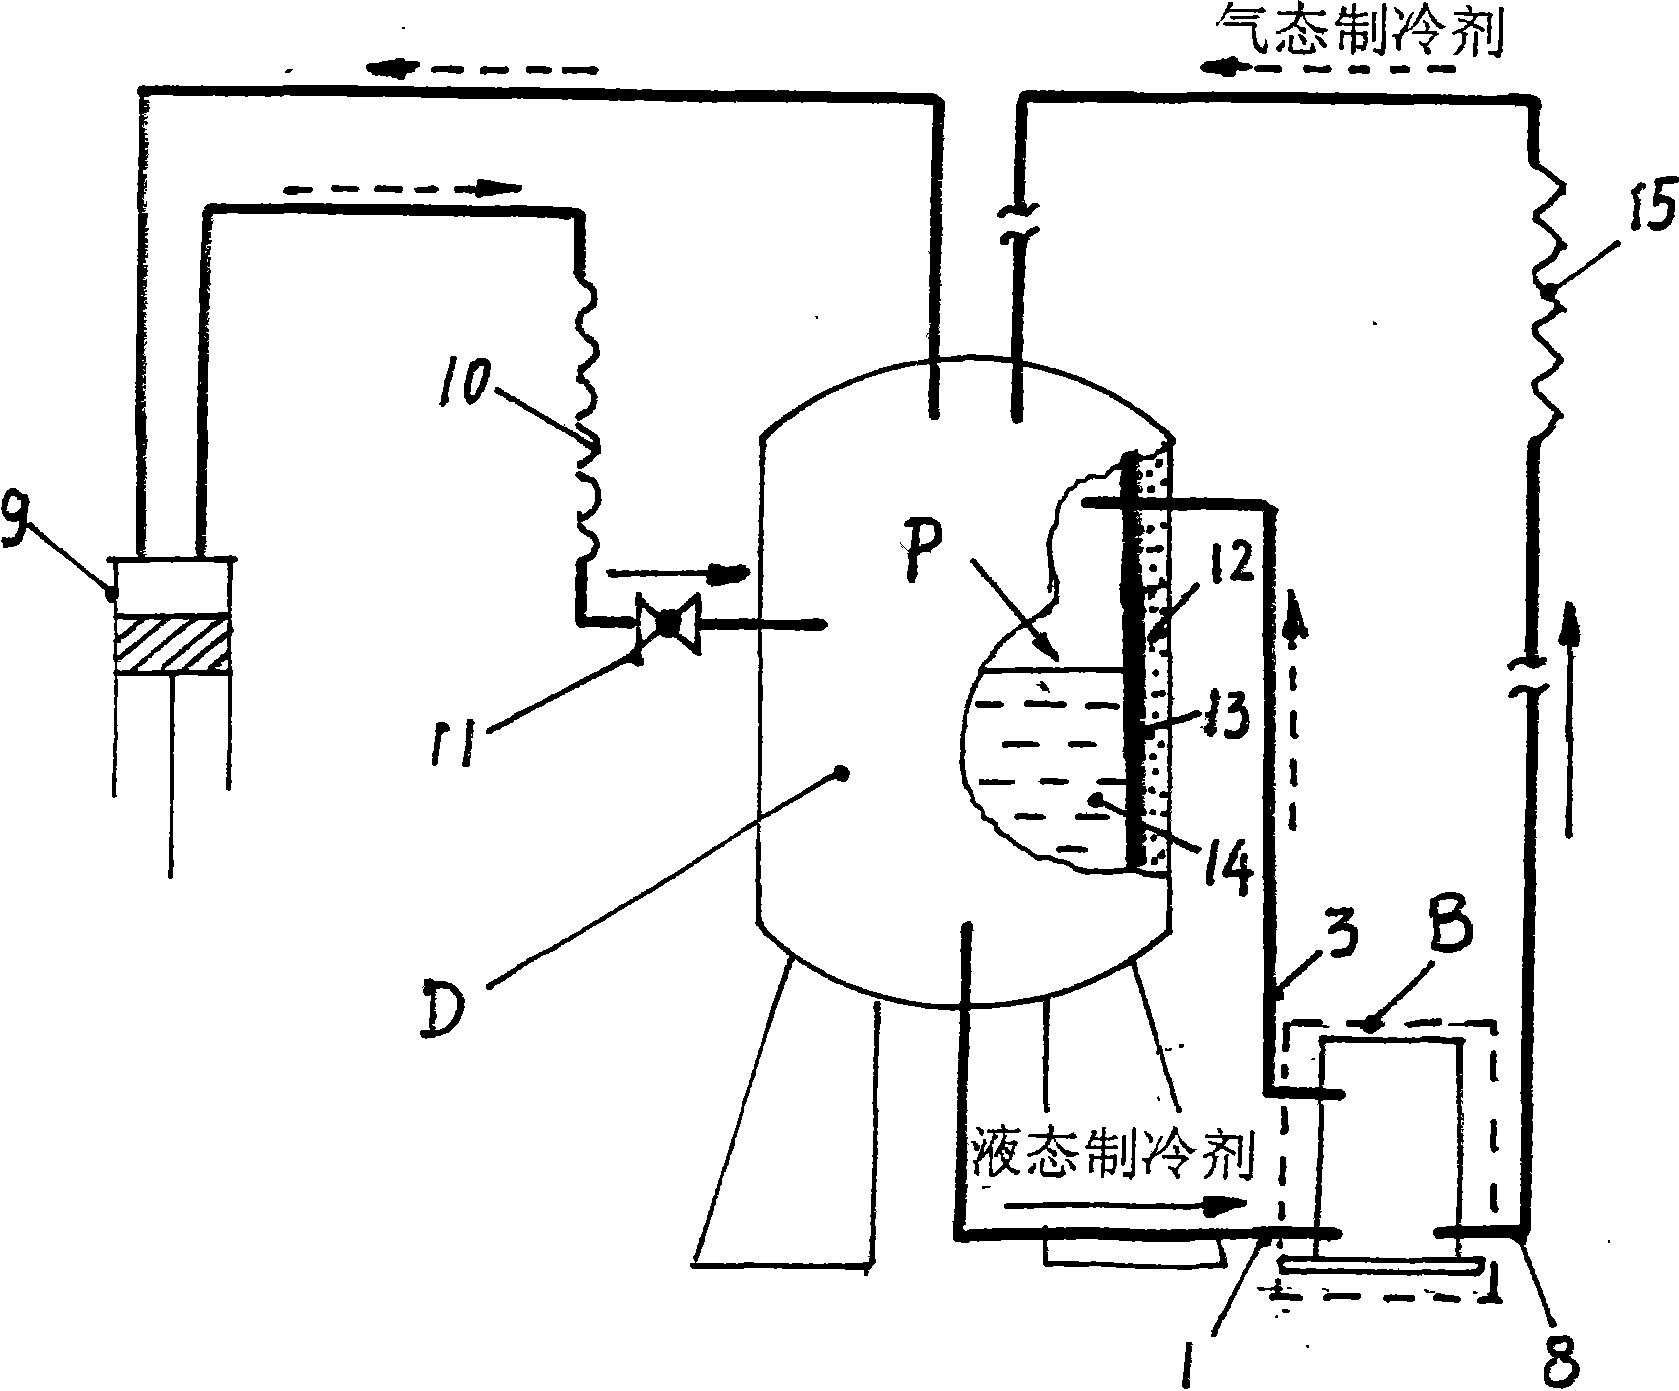 Full sealing type refrigerant fluid pump and its application in high-rise storied house refrigerating system